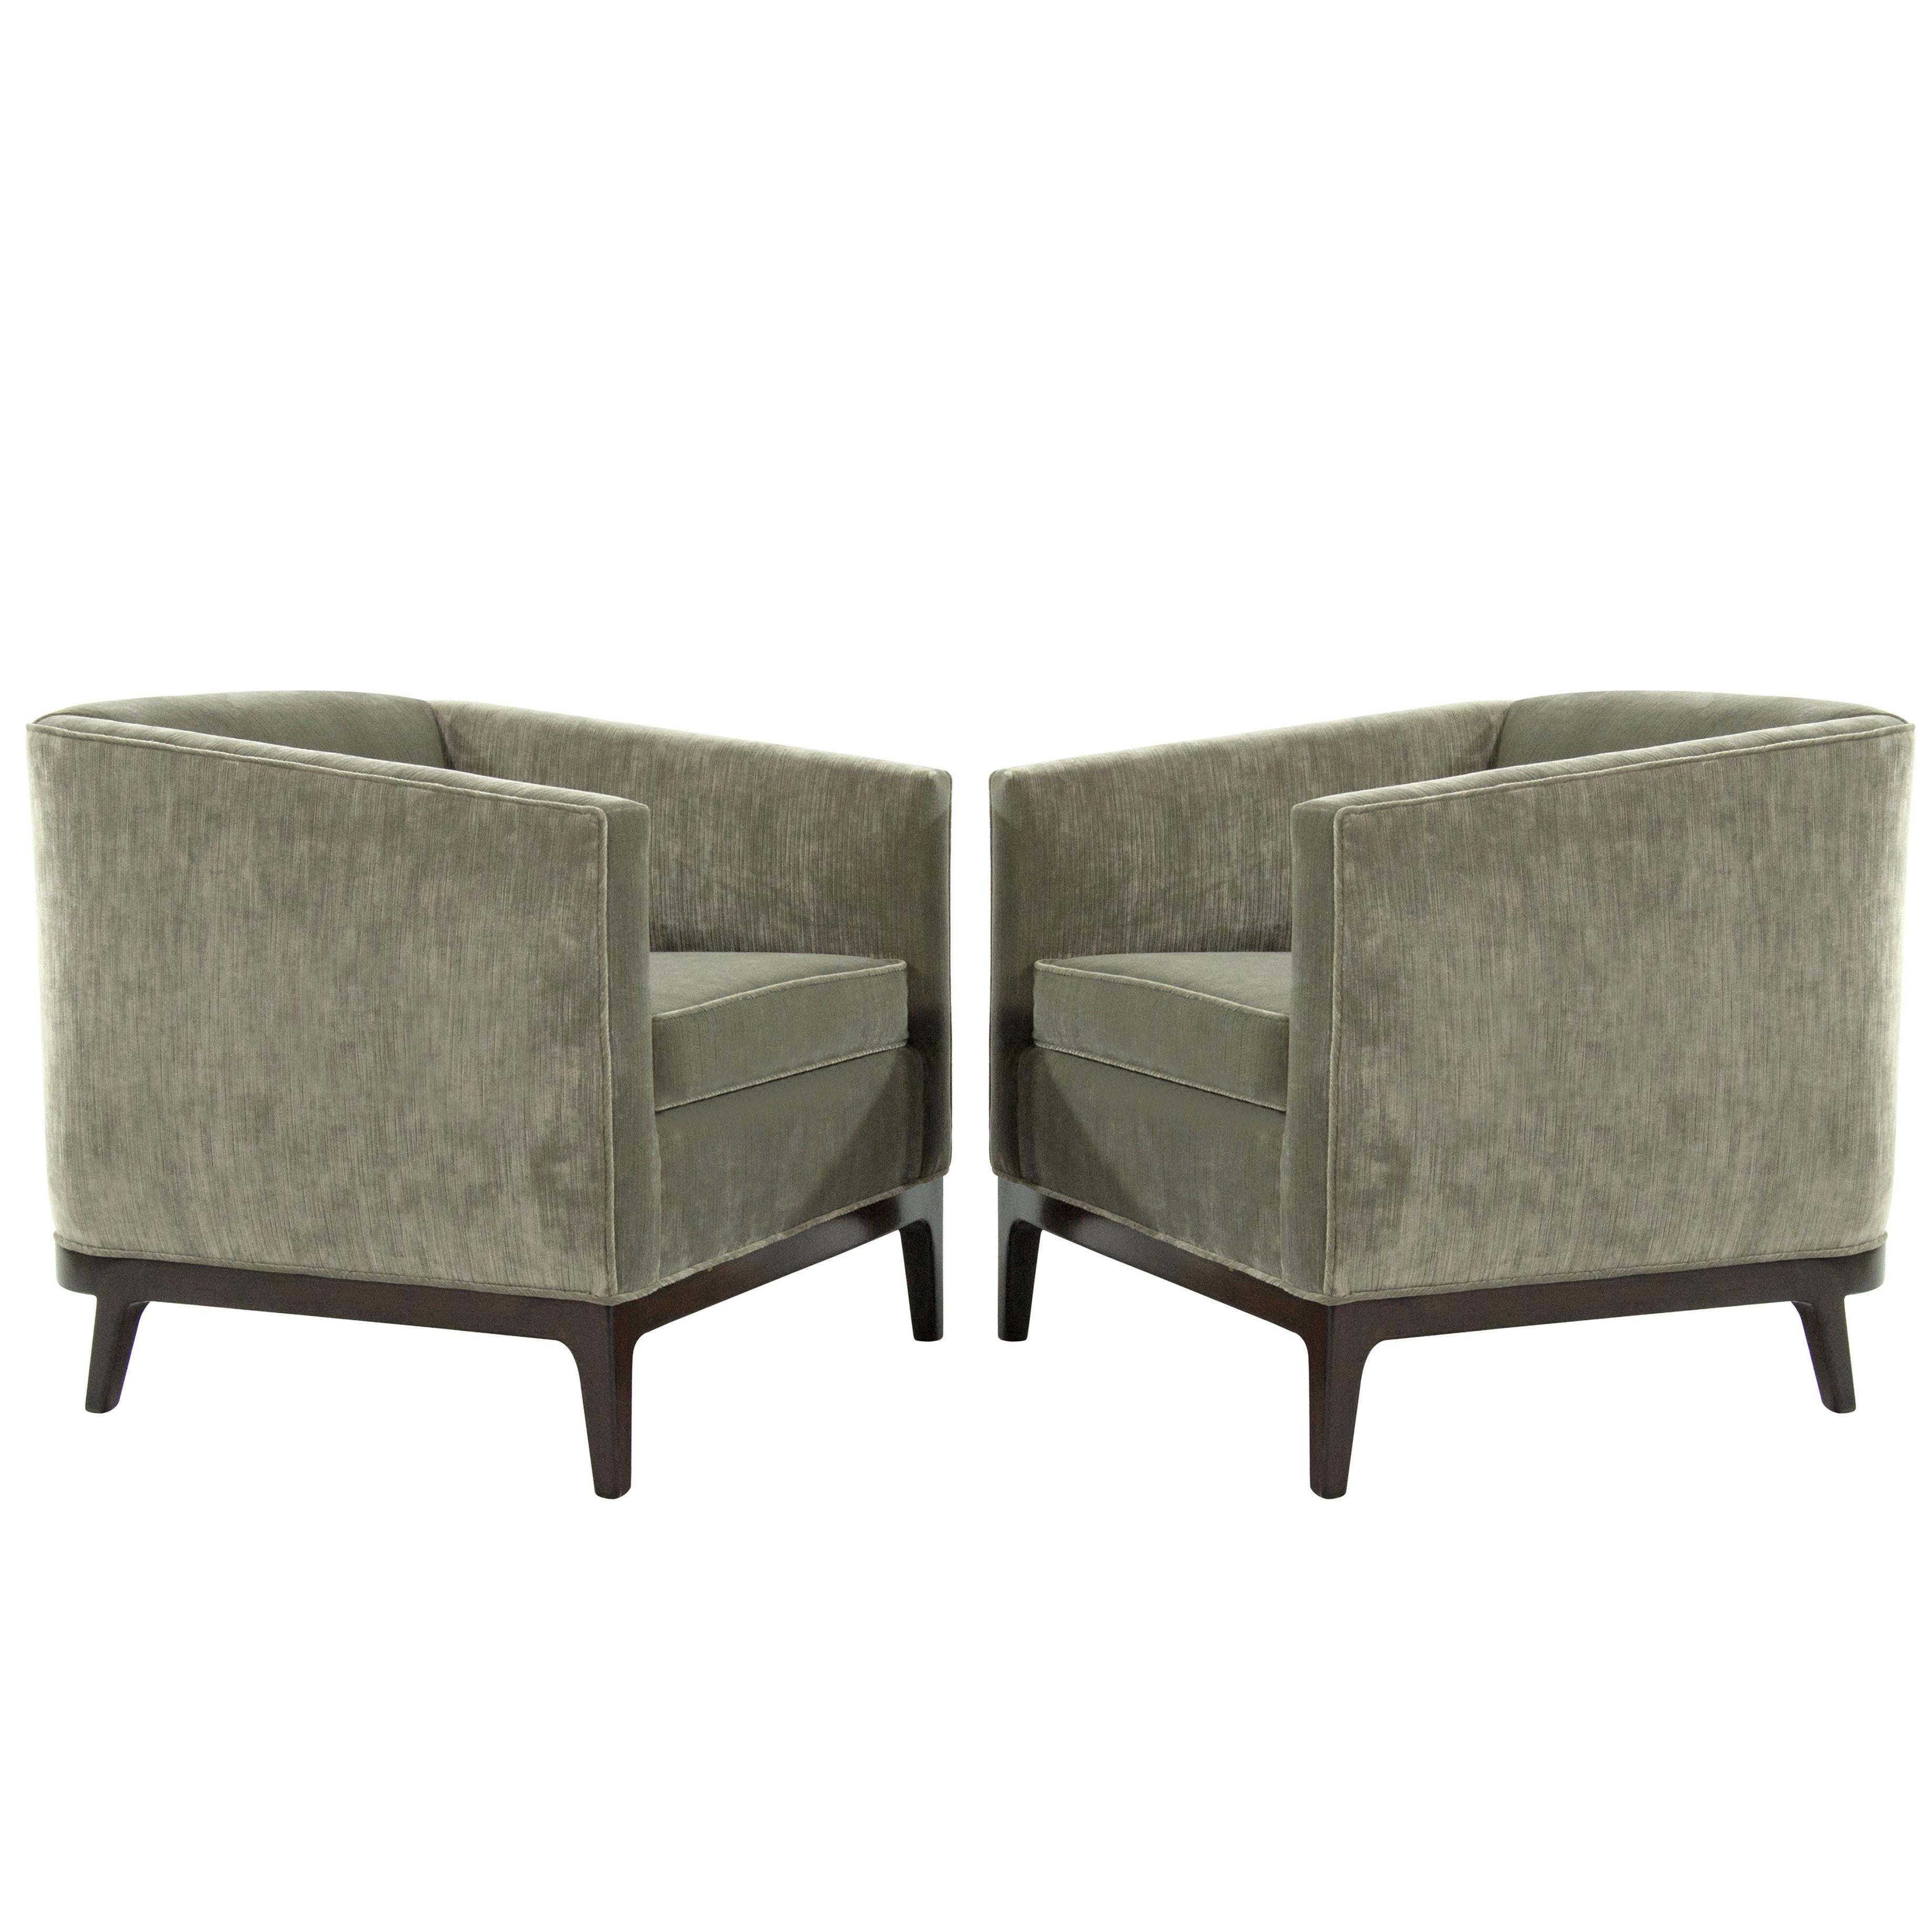 Mid-Century Modern Tub Chairs in Chenille